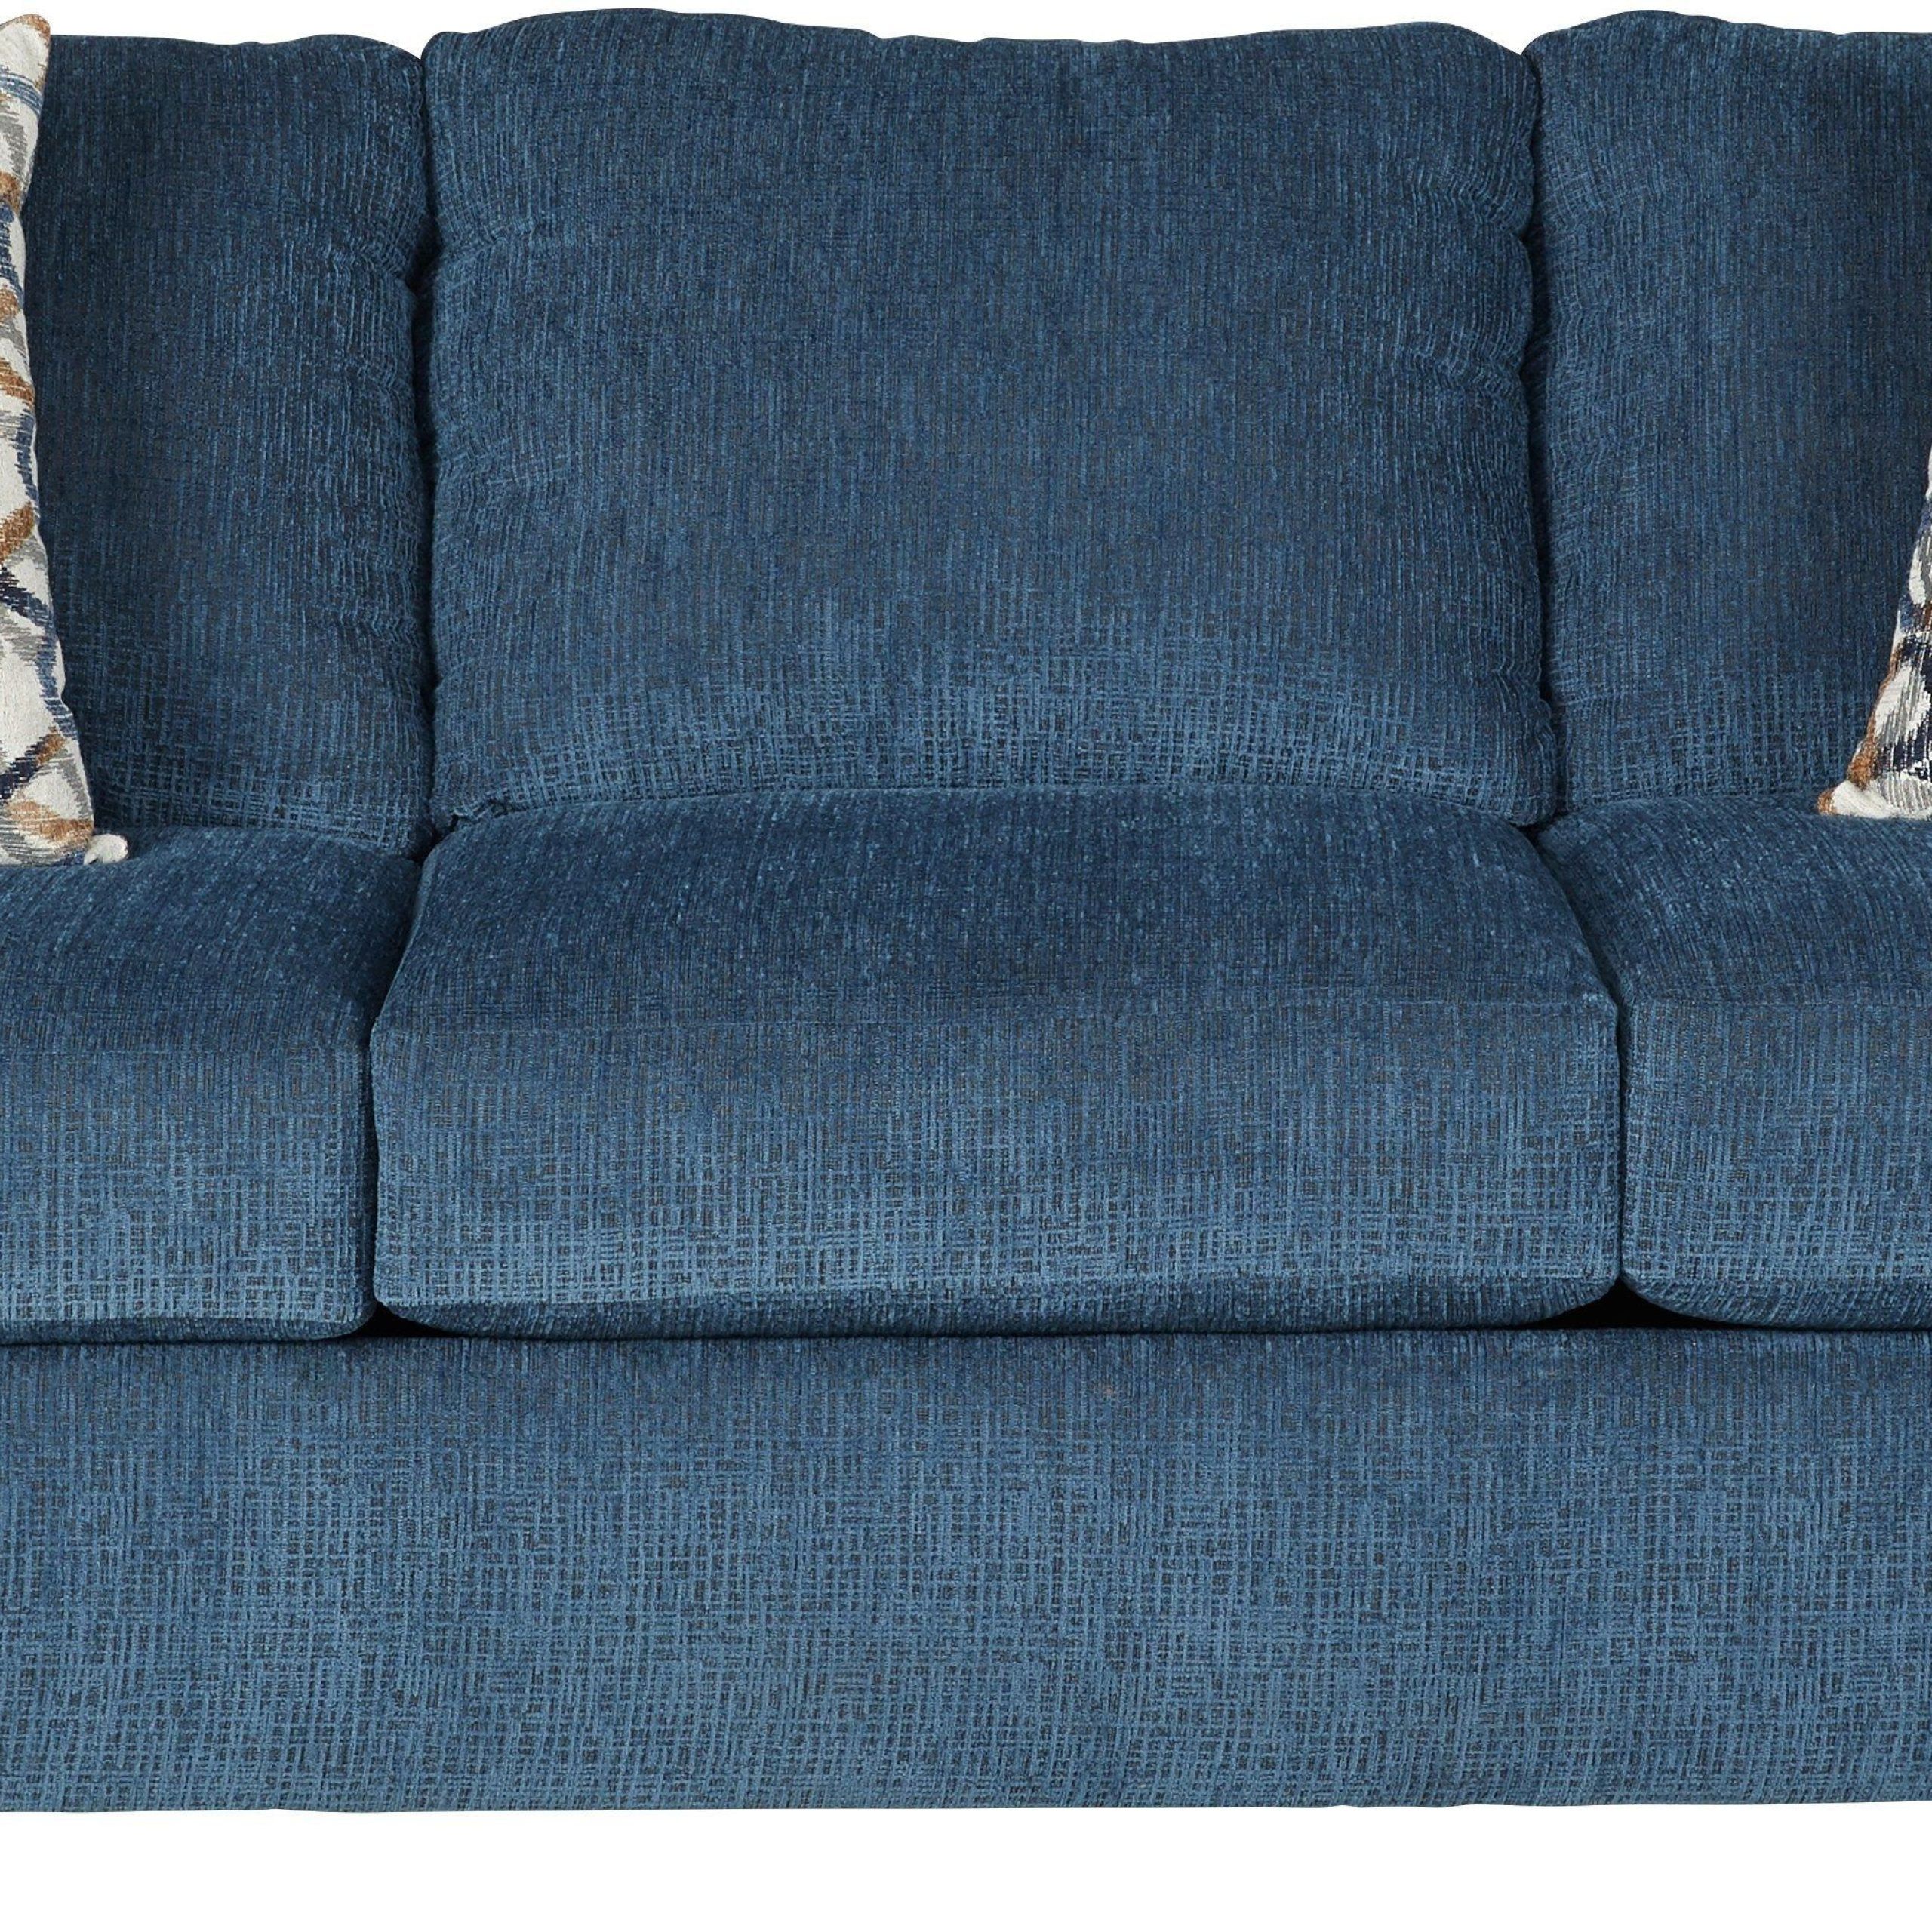 Navy Sleeper Sofa Couches For Favorite Navy Blue Living Room Set Inspirational Lucan Navy Sleeper In  (View 12 of 15)